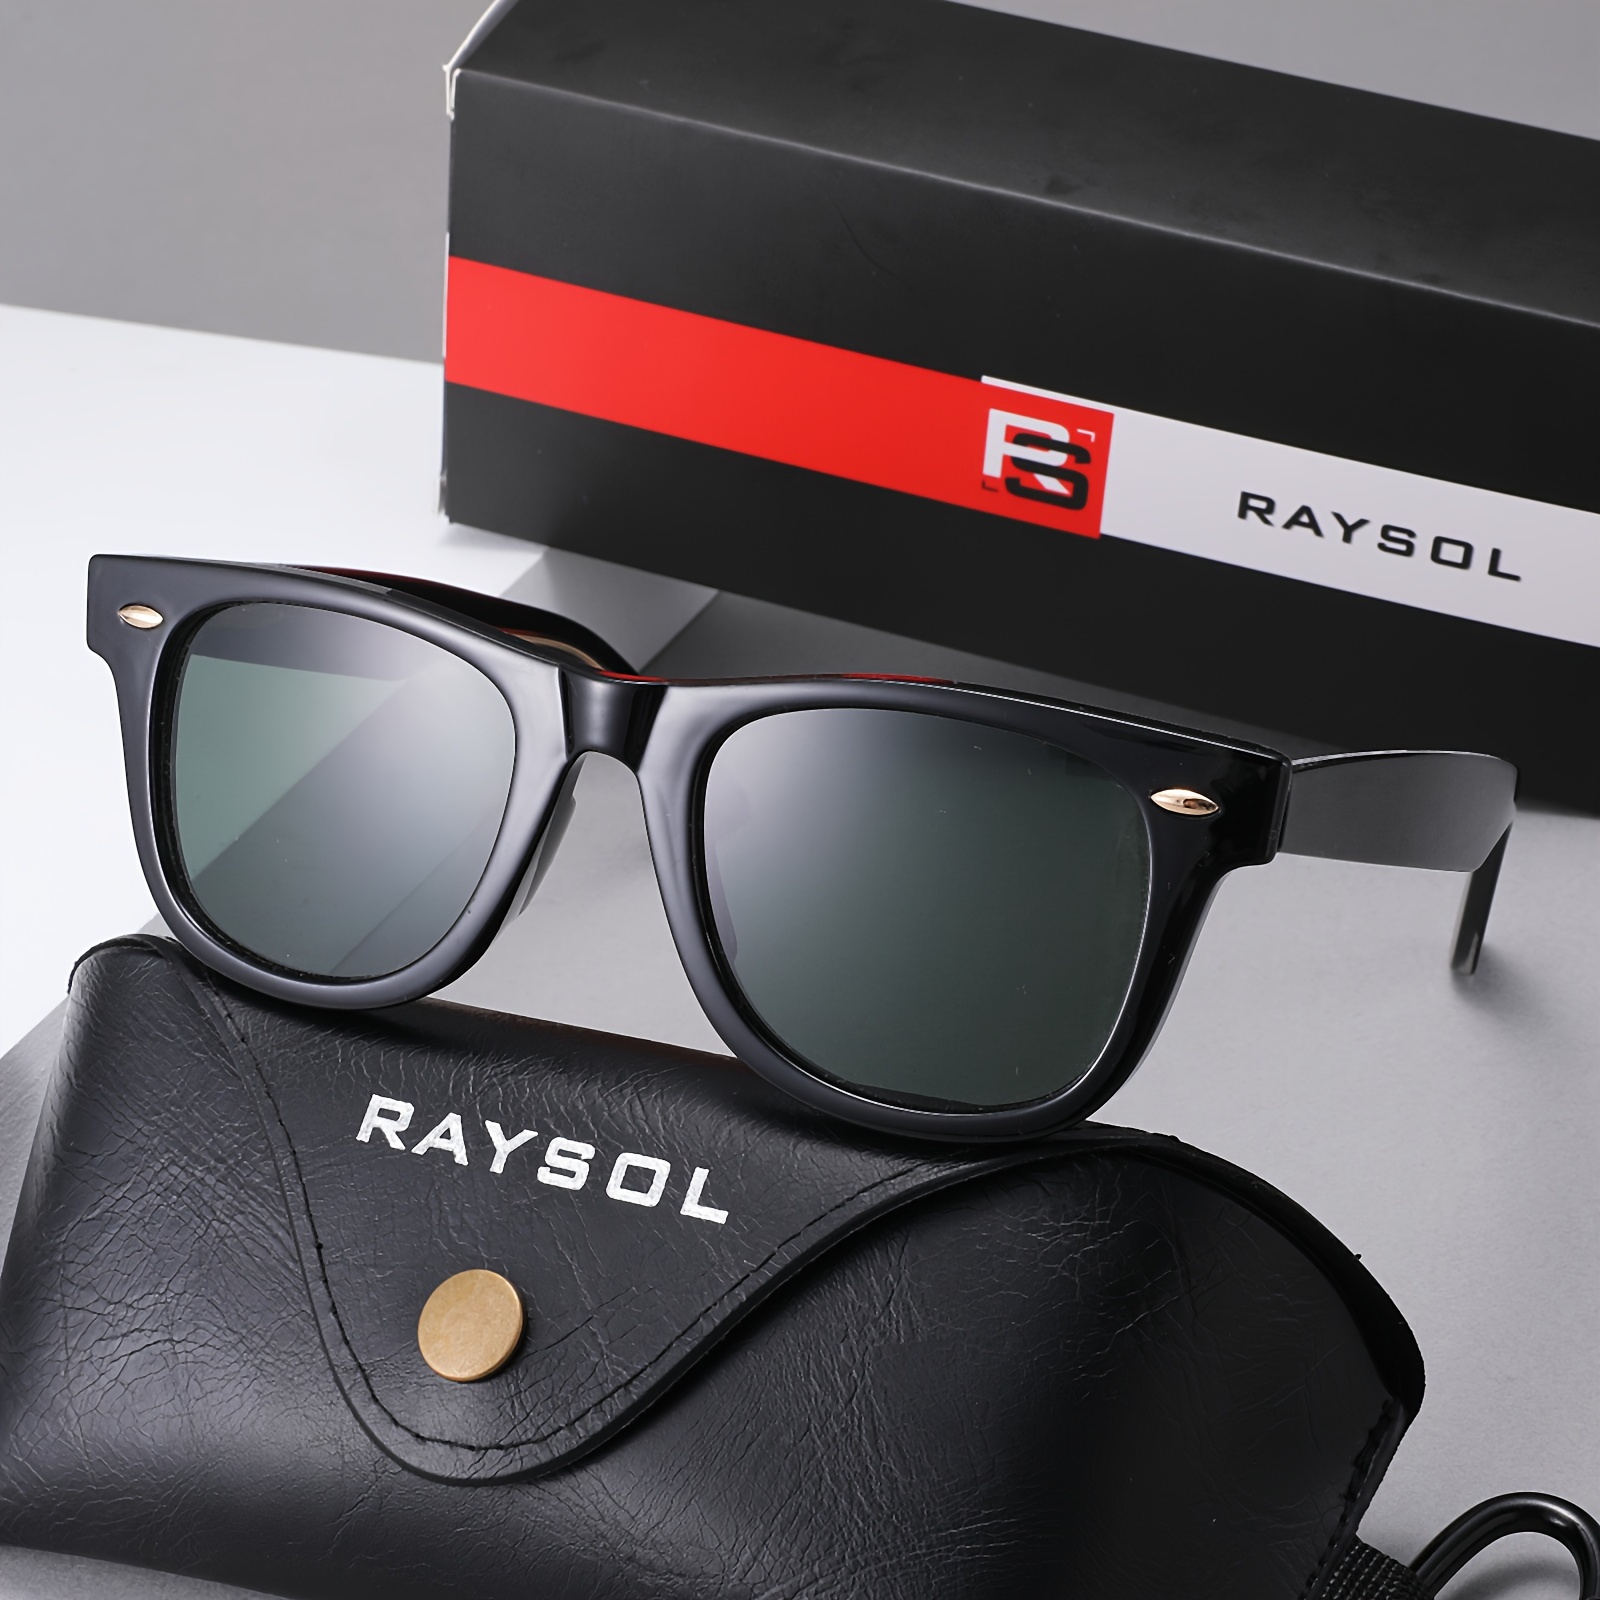 

Raysol Sunglasses For Women Men, Formable Temples, With Metal Core, Retro Square Stylish Full Rim Fashion Glasses For Vacation Beach Travel Fishing